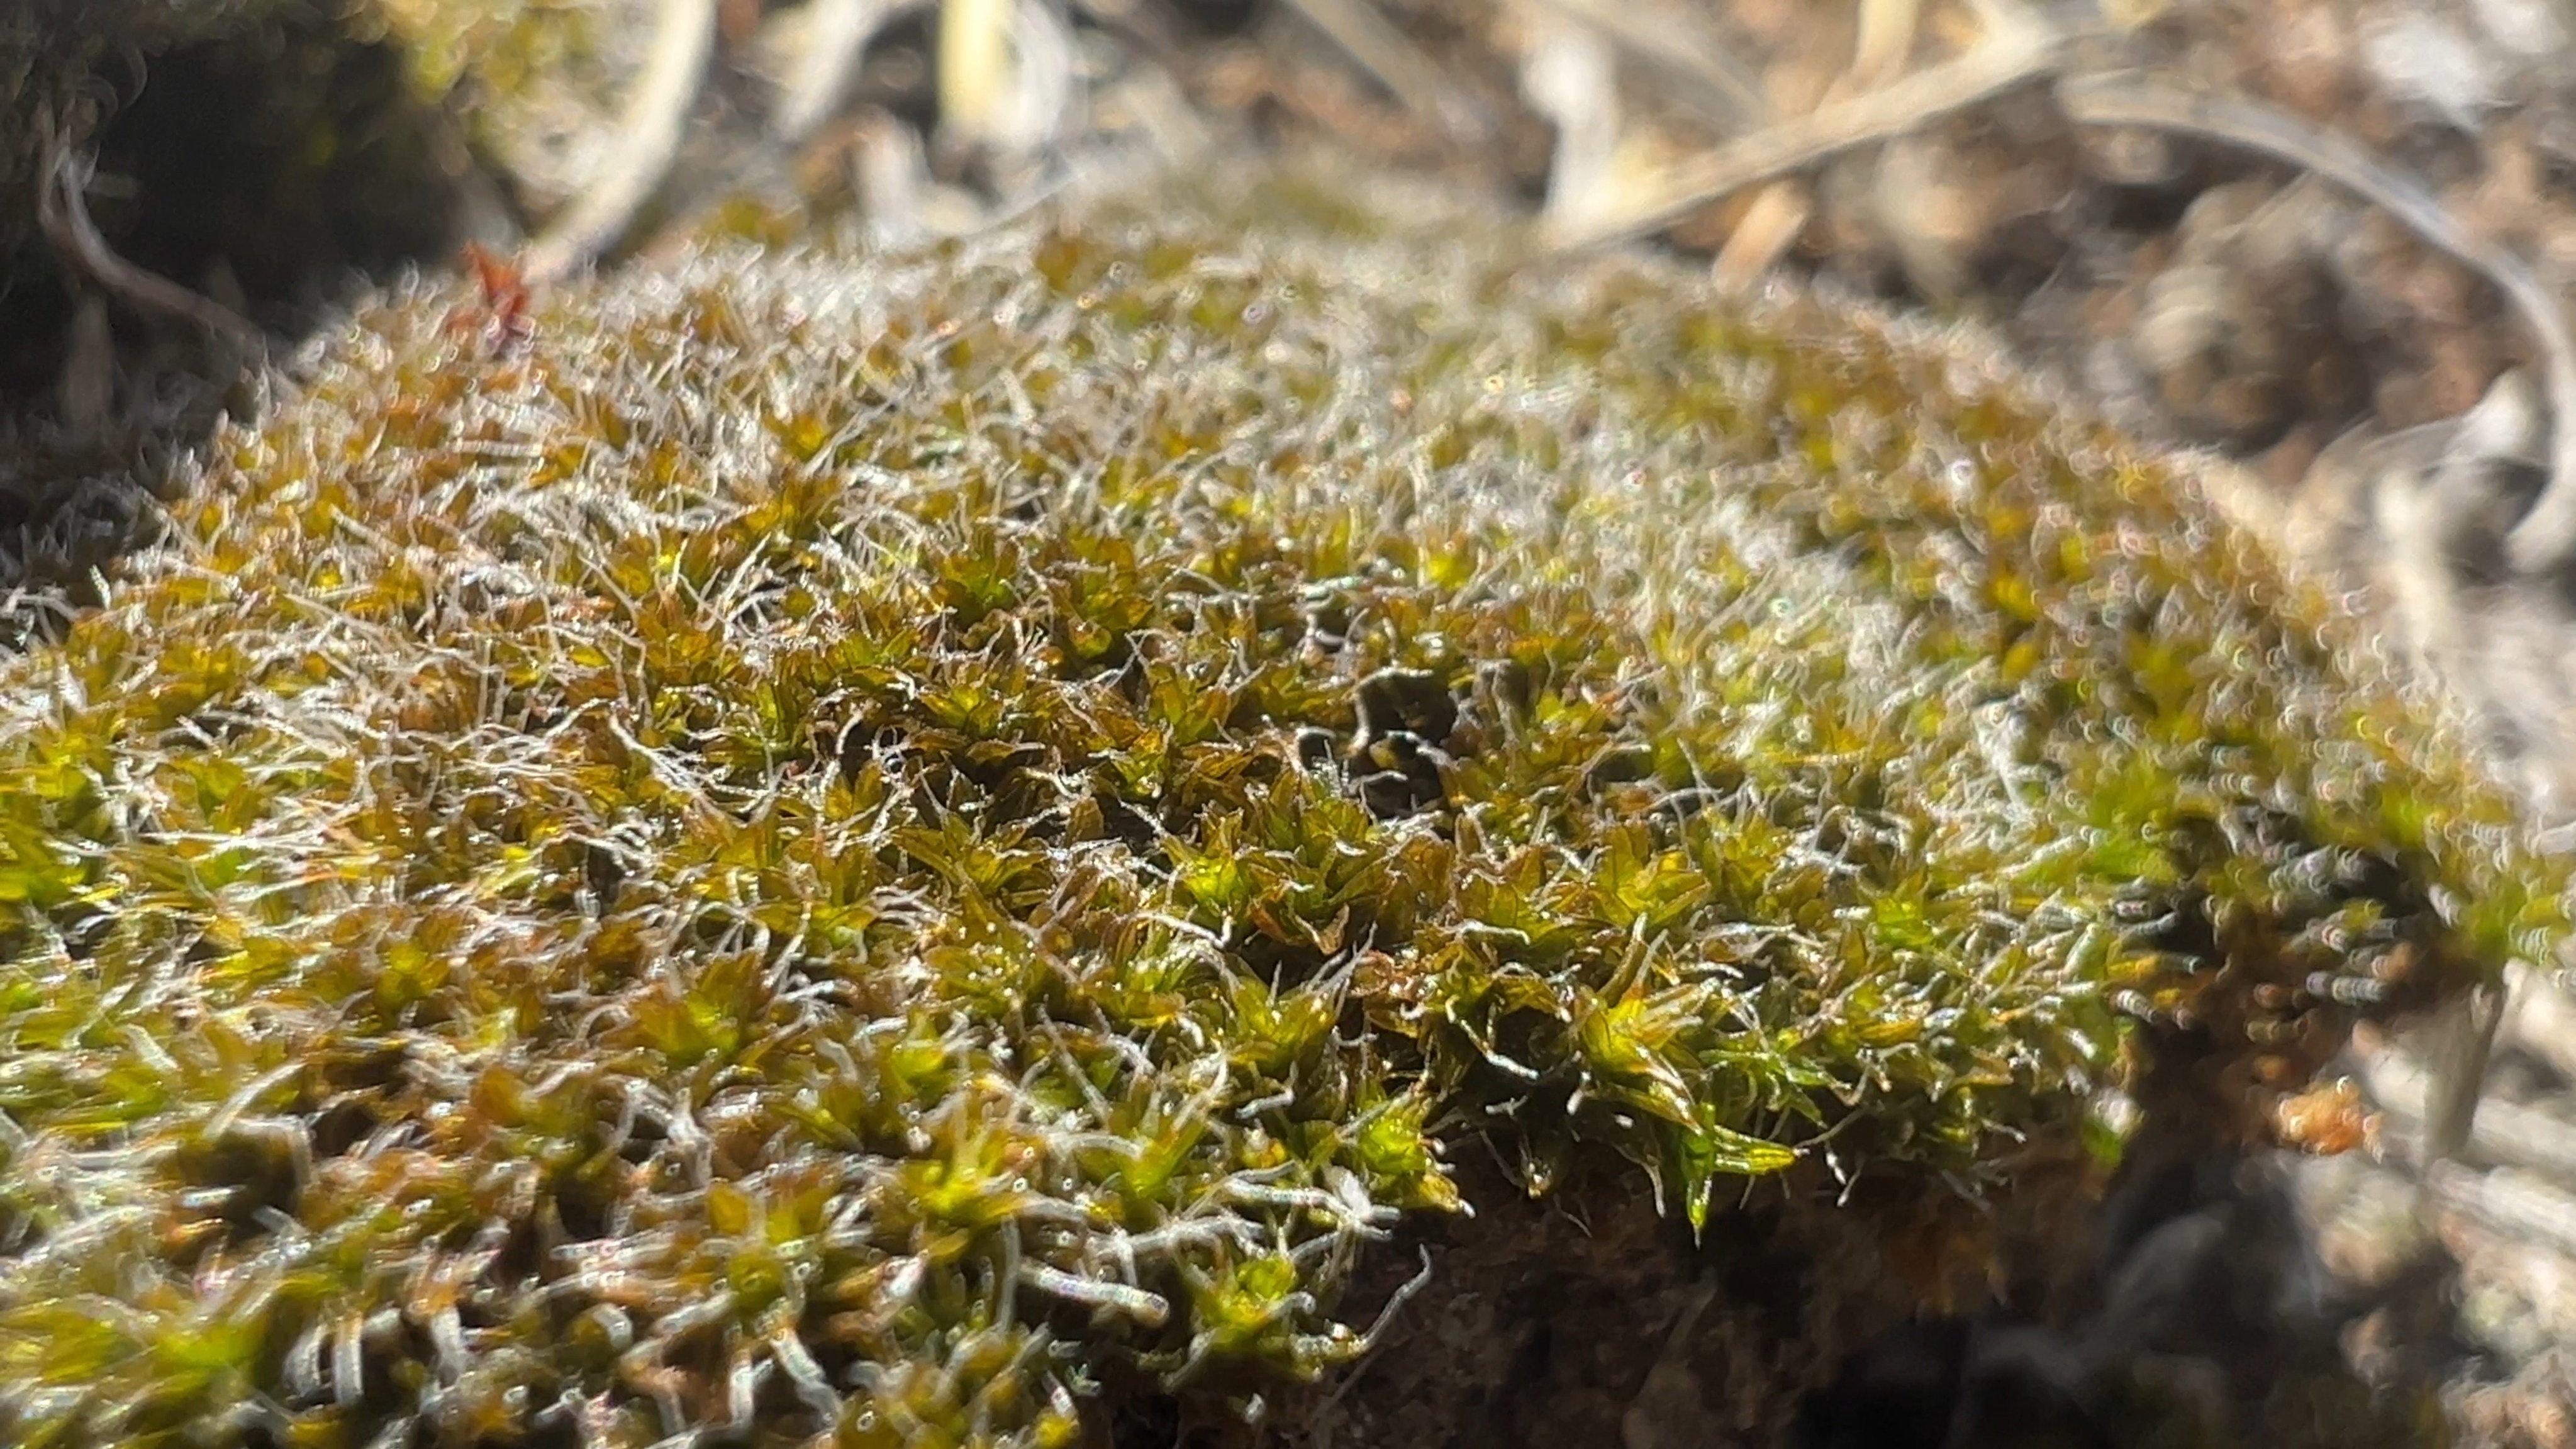 A team of researchers from the Chinese Academy of Sciences found that a desert moss species could withstand the harsh conditions of the Martian environment. Photo: Handout